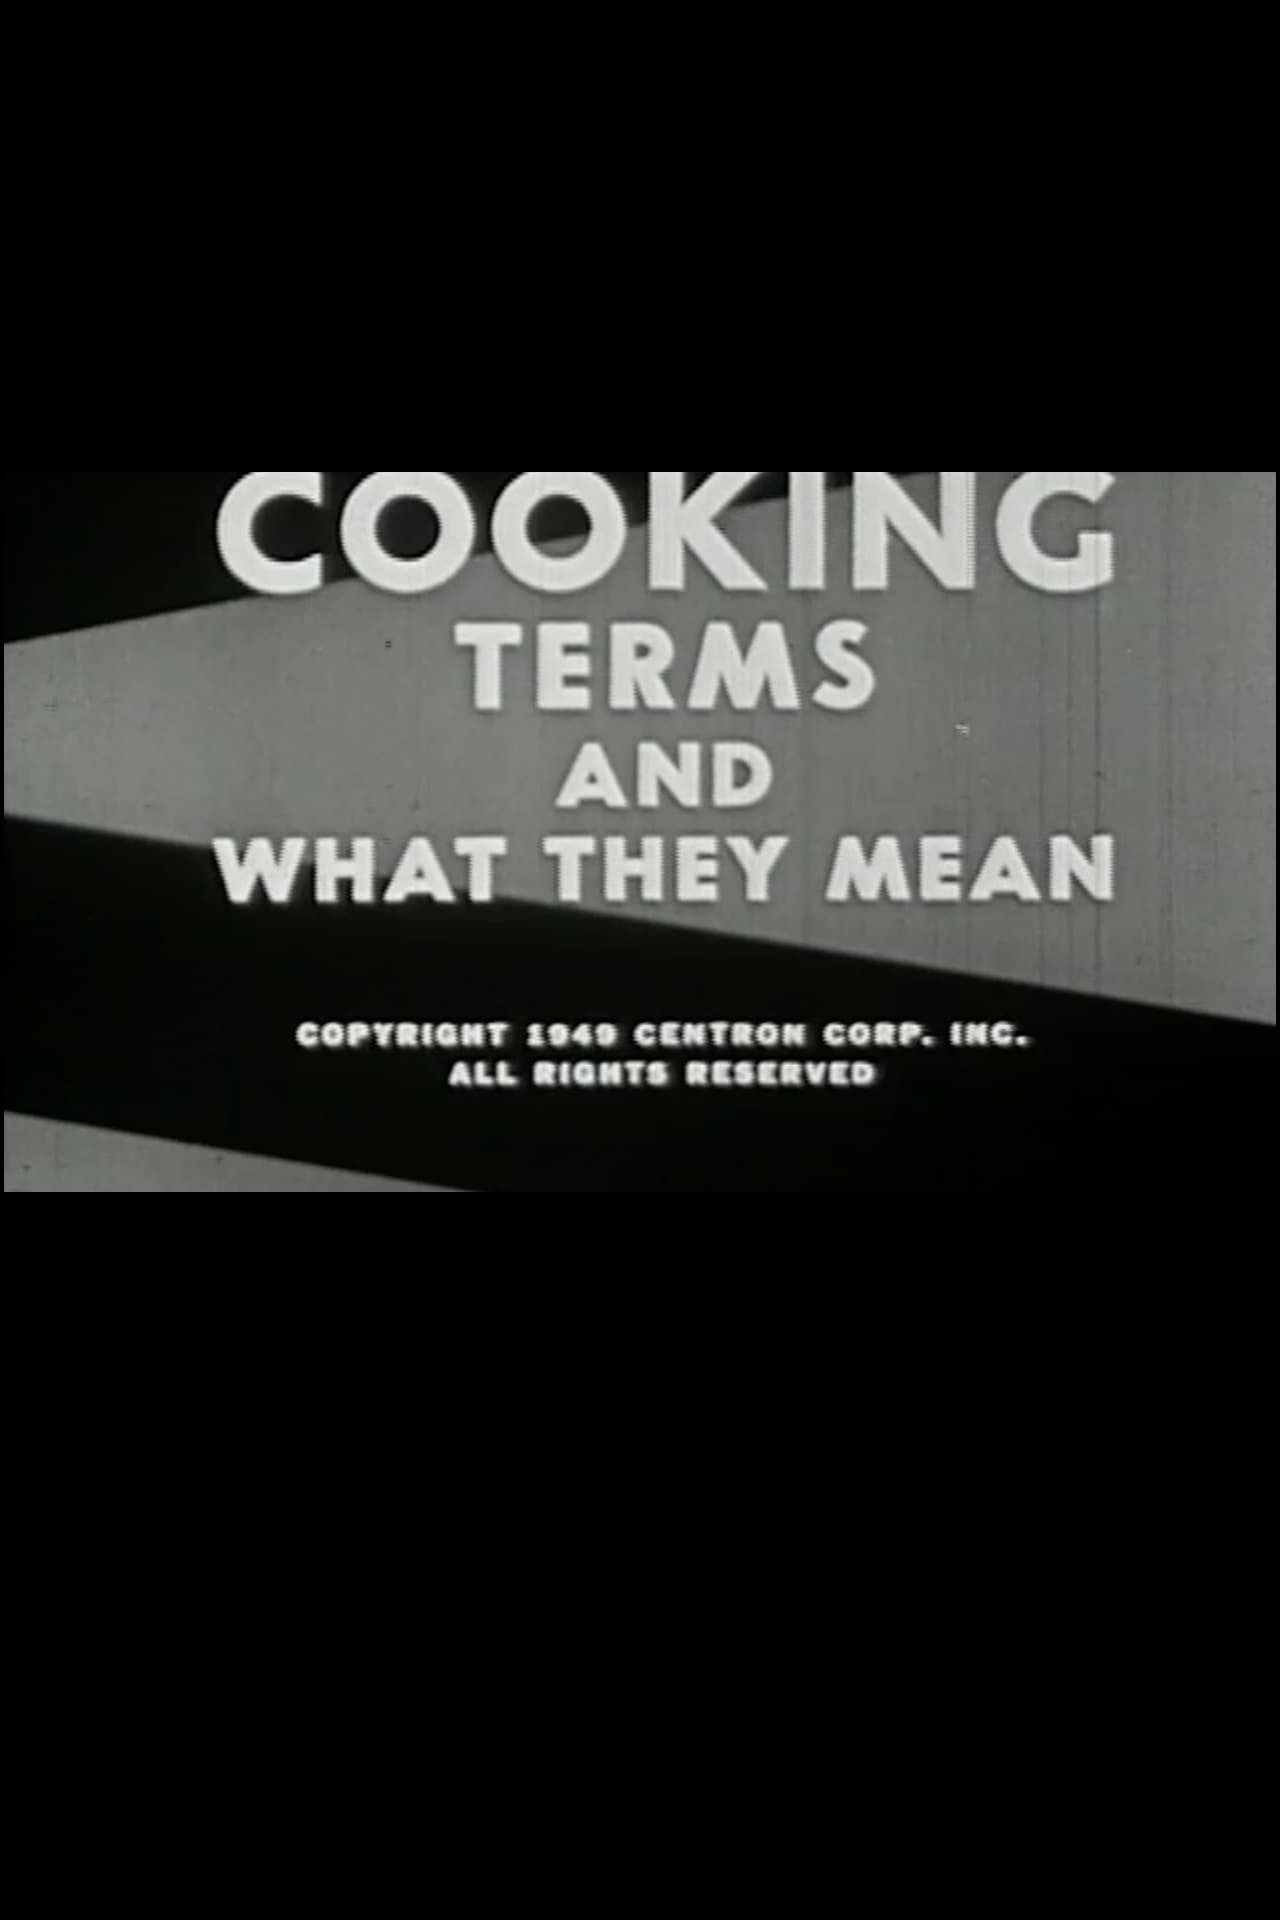 Cooking: Terms and What They Mean